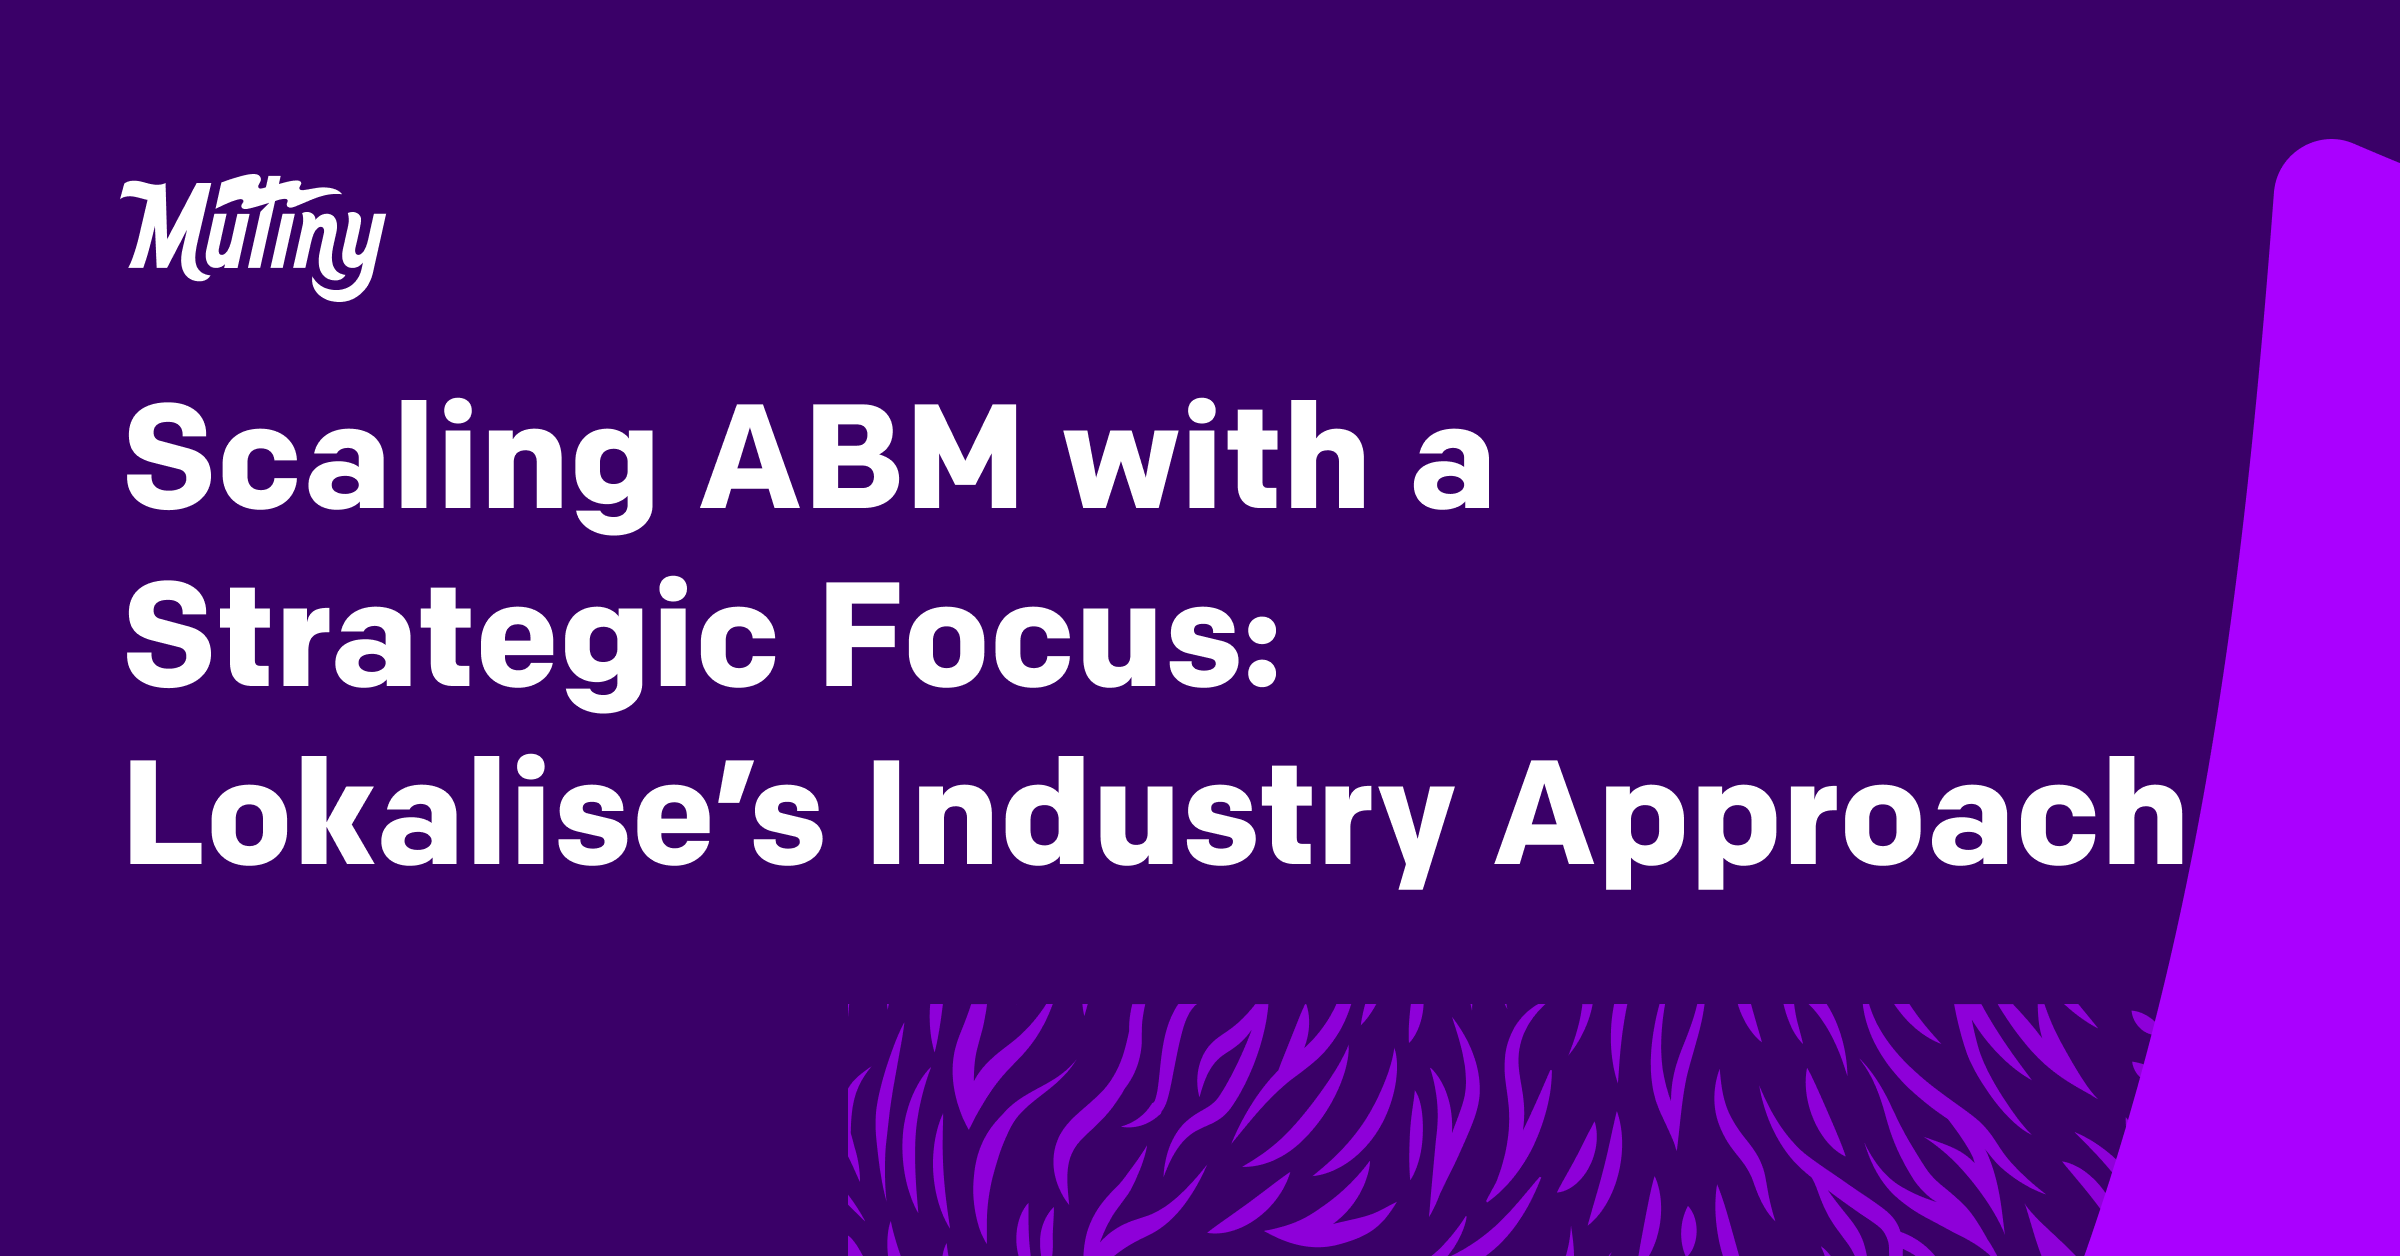 Scaling ABM with a Strategic Focus: Lokalise’s Industry Approach